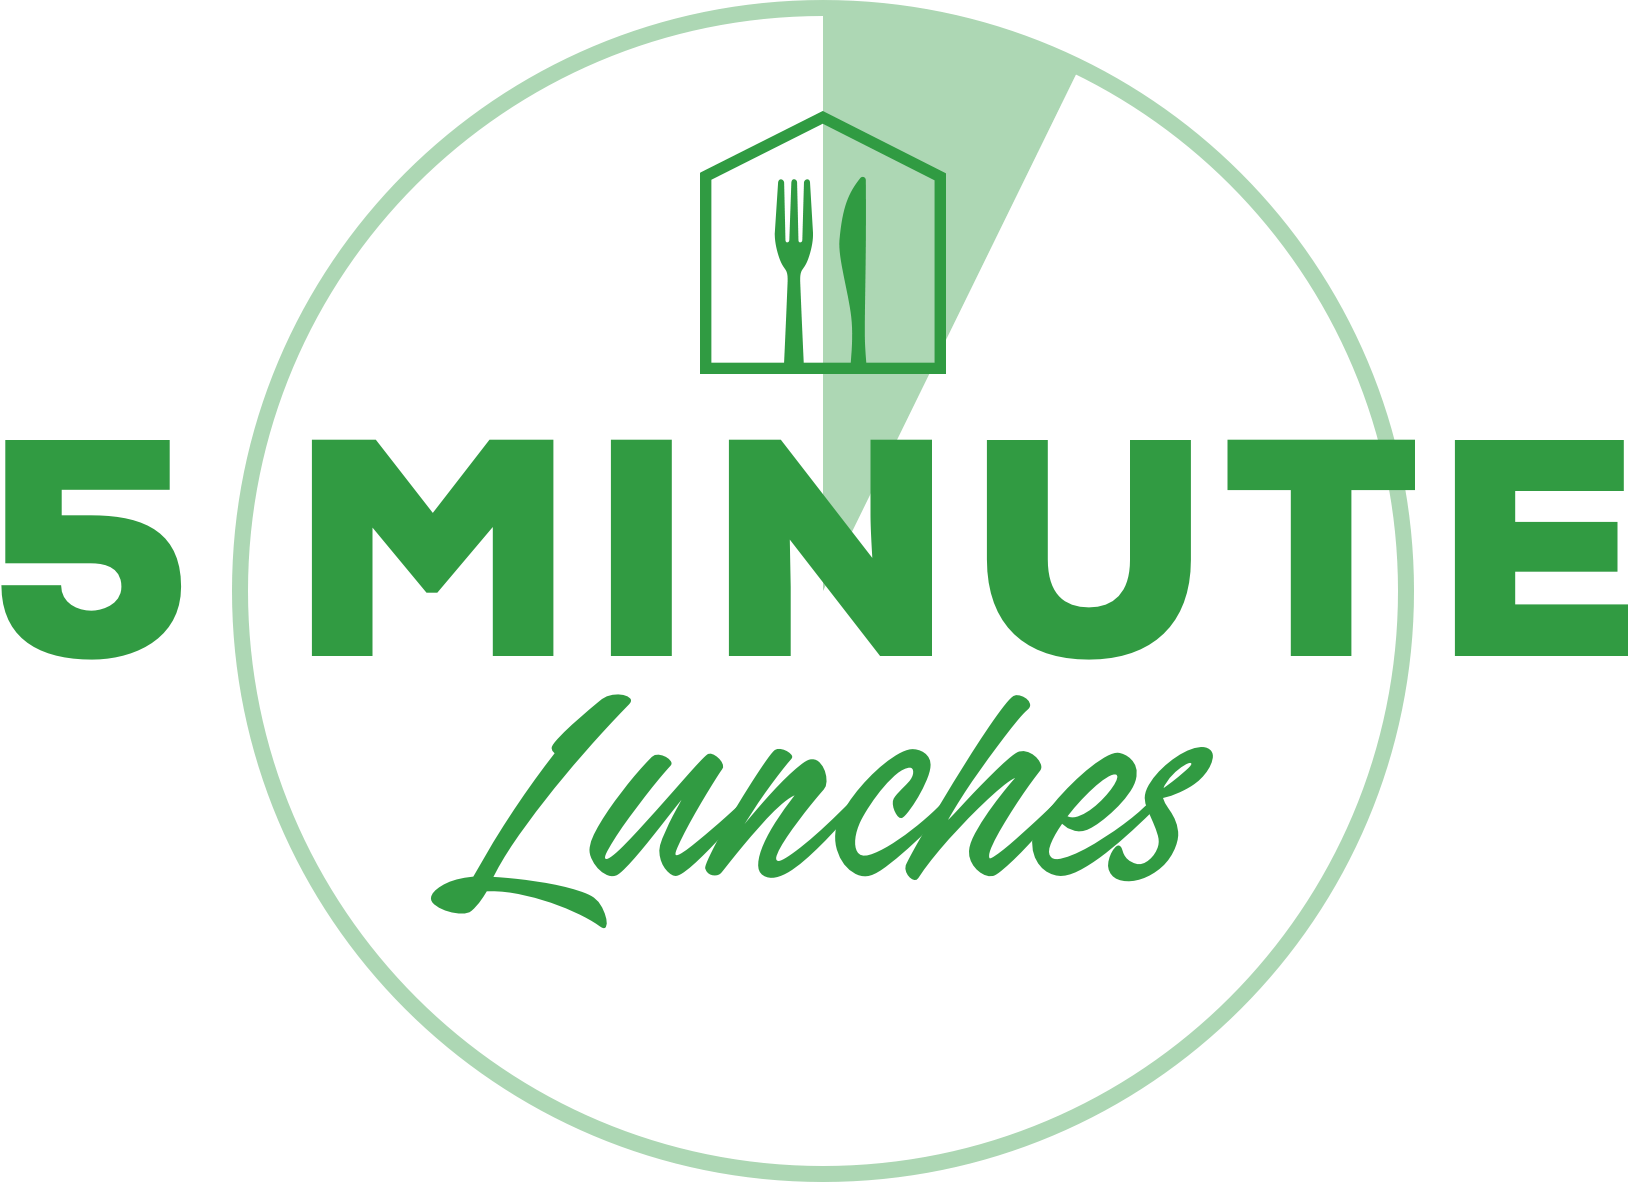 Home Chef's 5 Minute Lunches